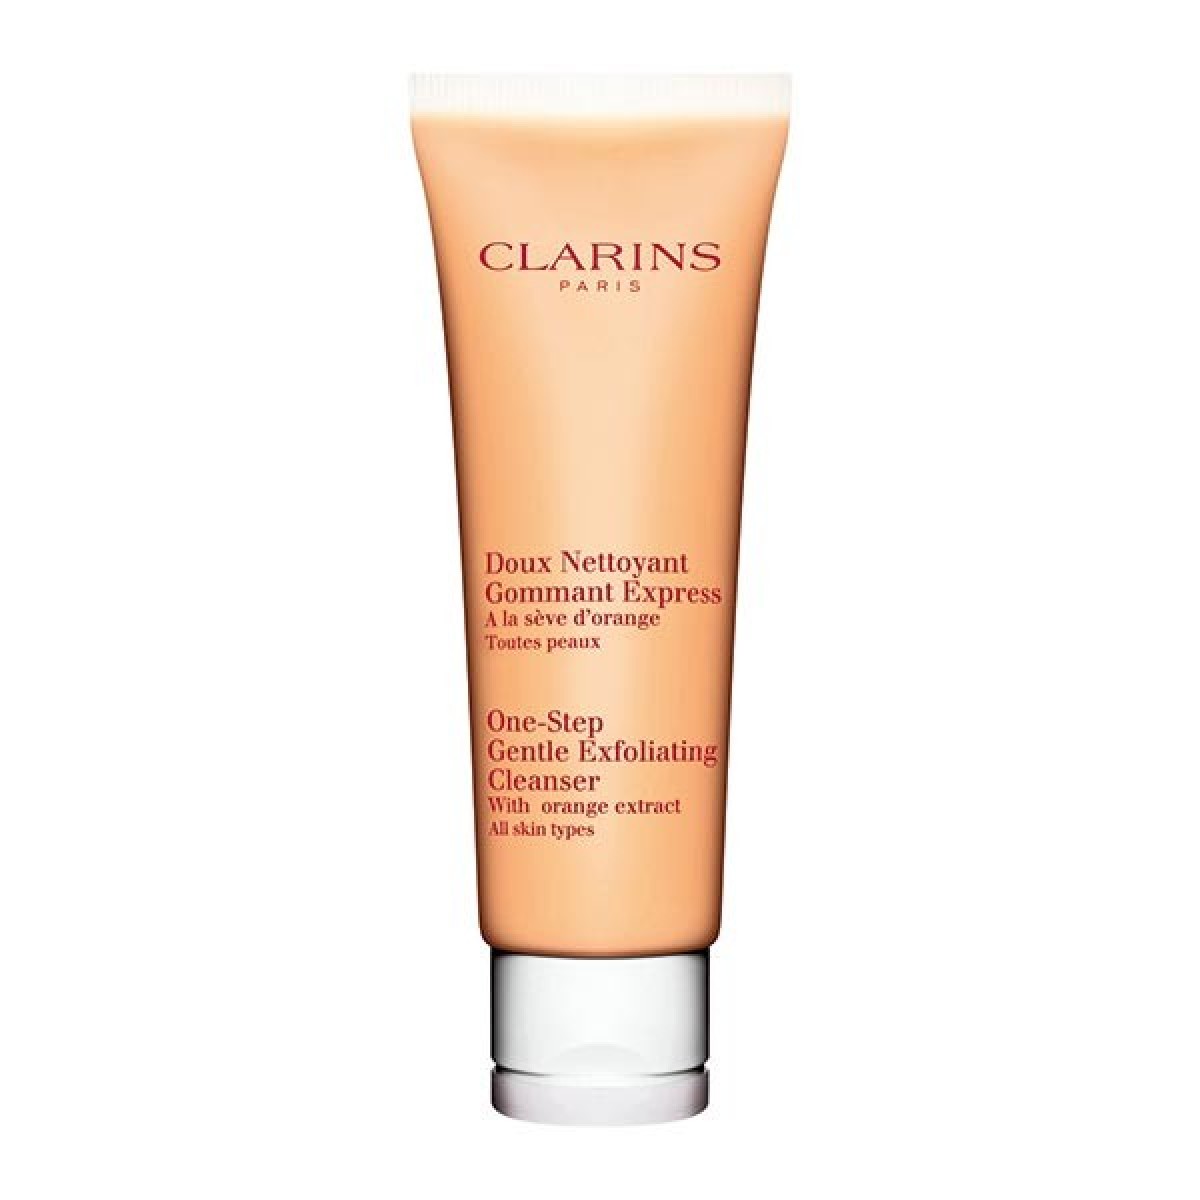 One-Step Gentle Exfoliating Cleanser with Orange extract for All skin types